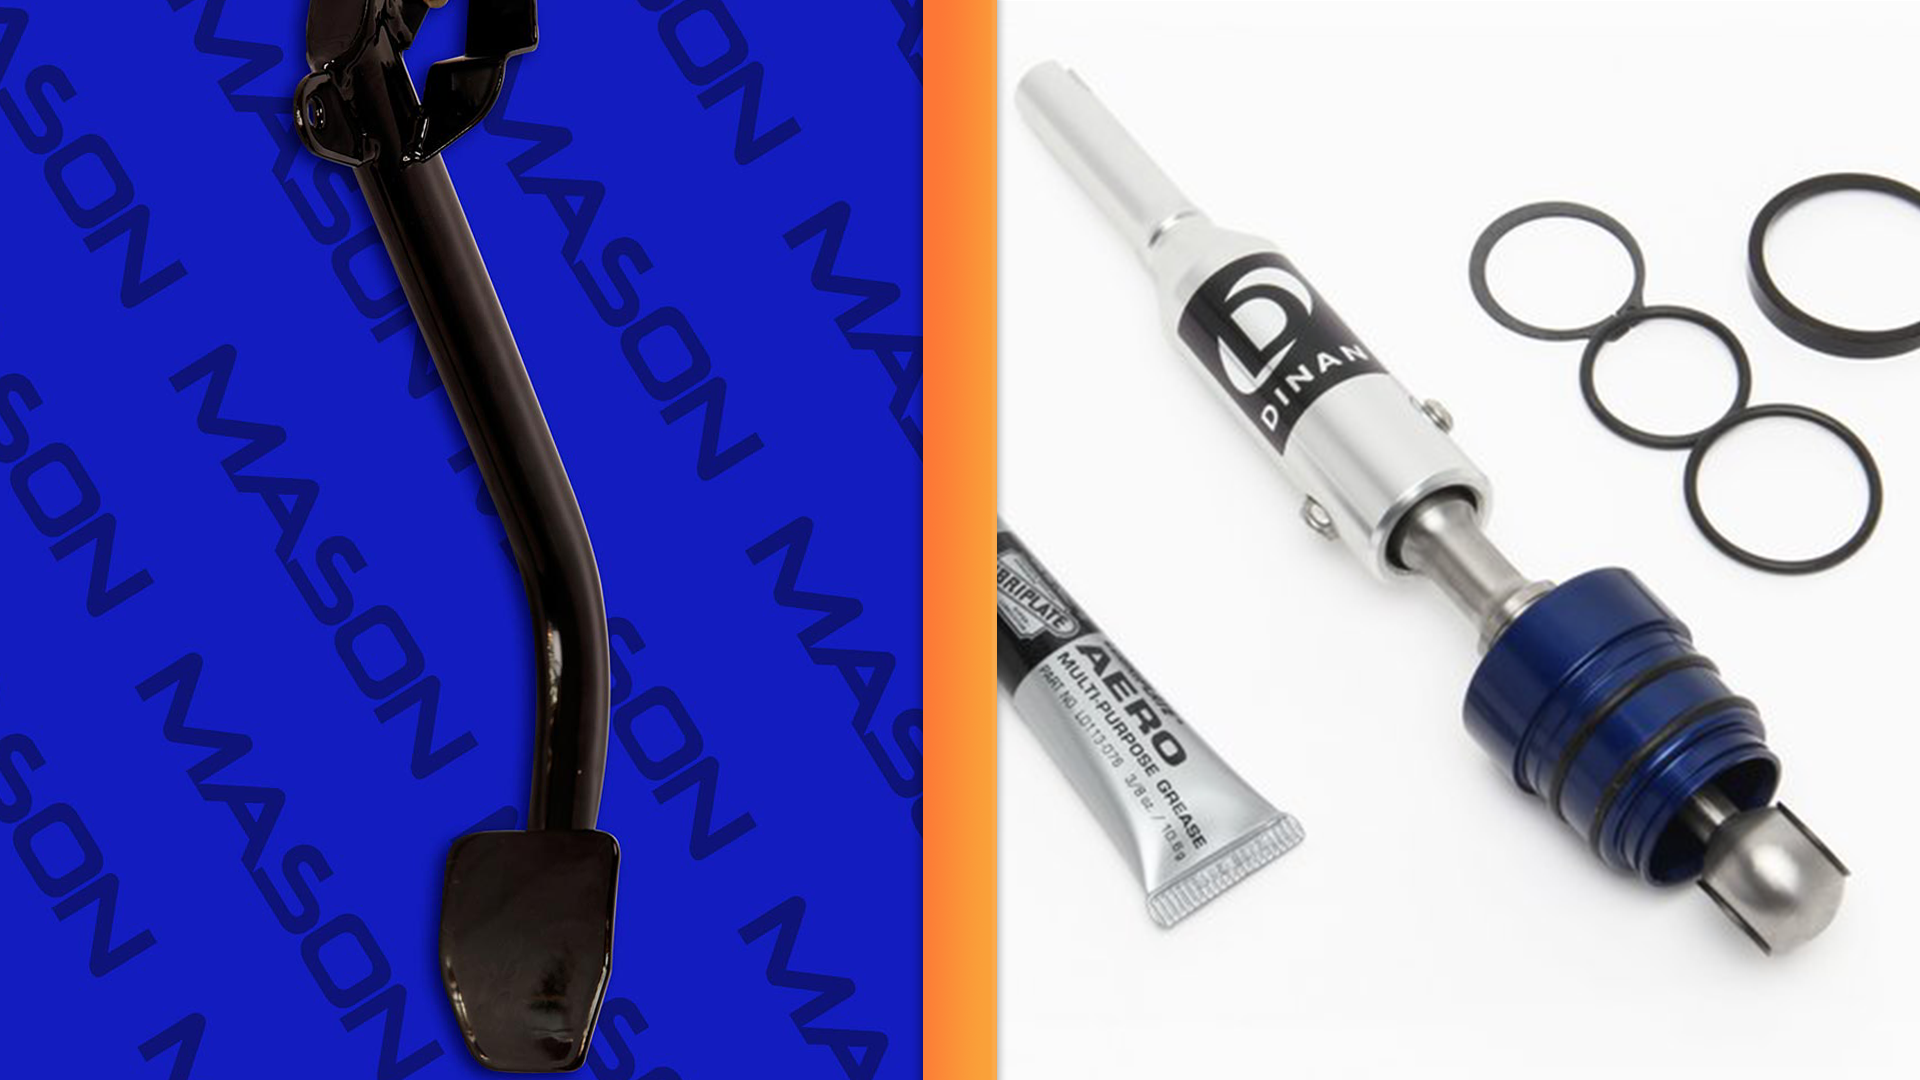 Two images. The one on the left is an image of a metal clutch pedal for a BMW and has a blue background with a repeating pattern that says "Mason." On the right, a shift lever made by aftermarket tuning company Dinan on a white background.